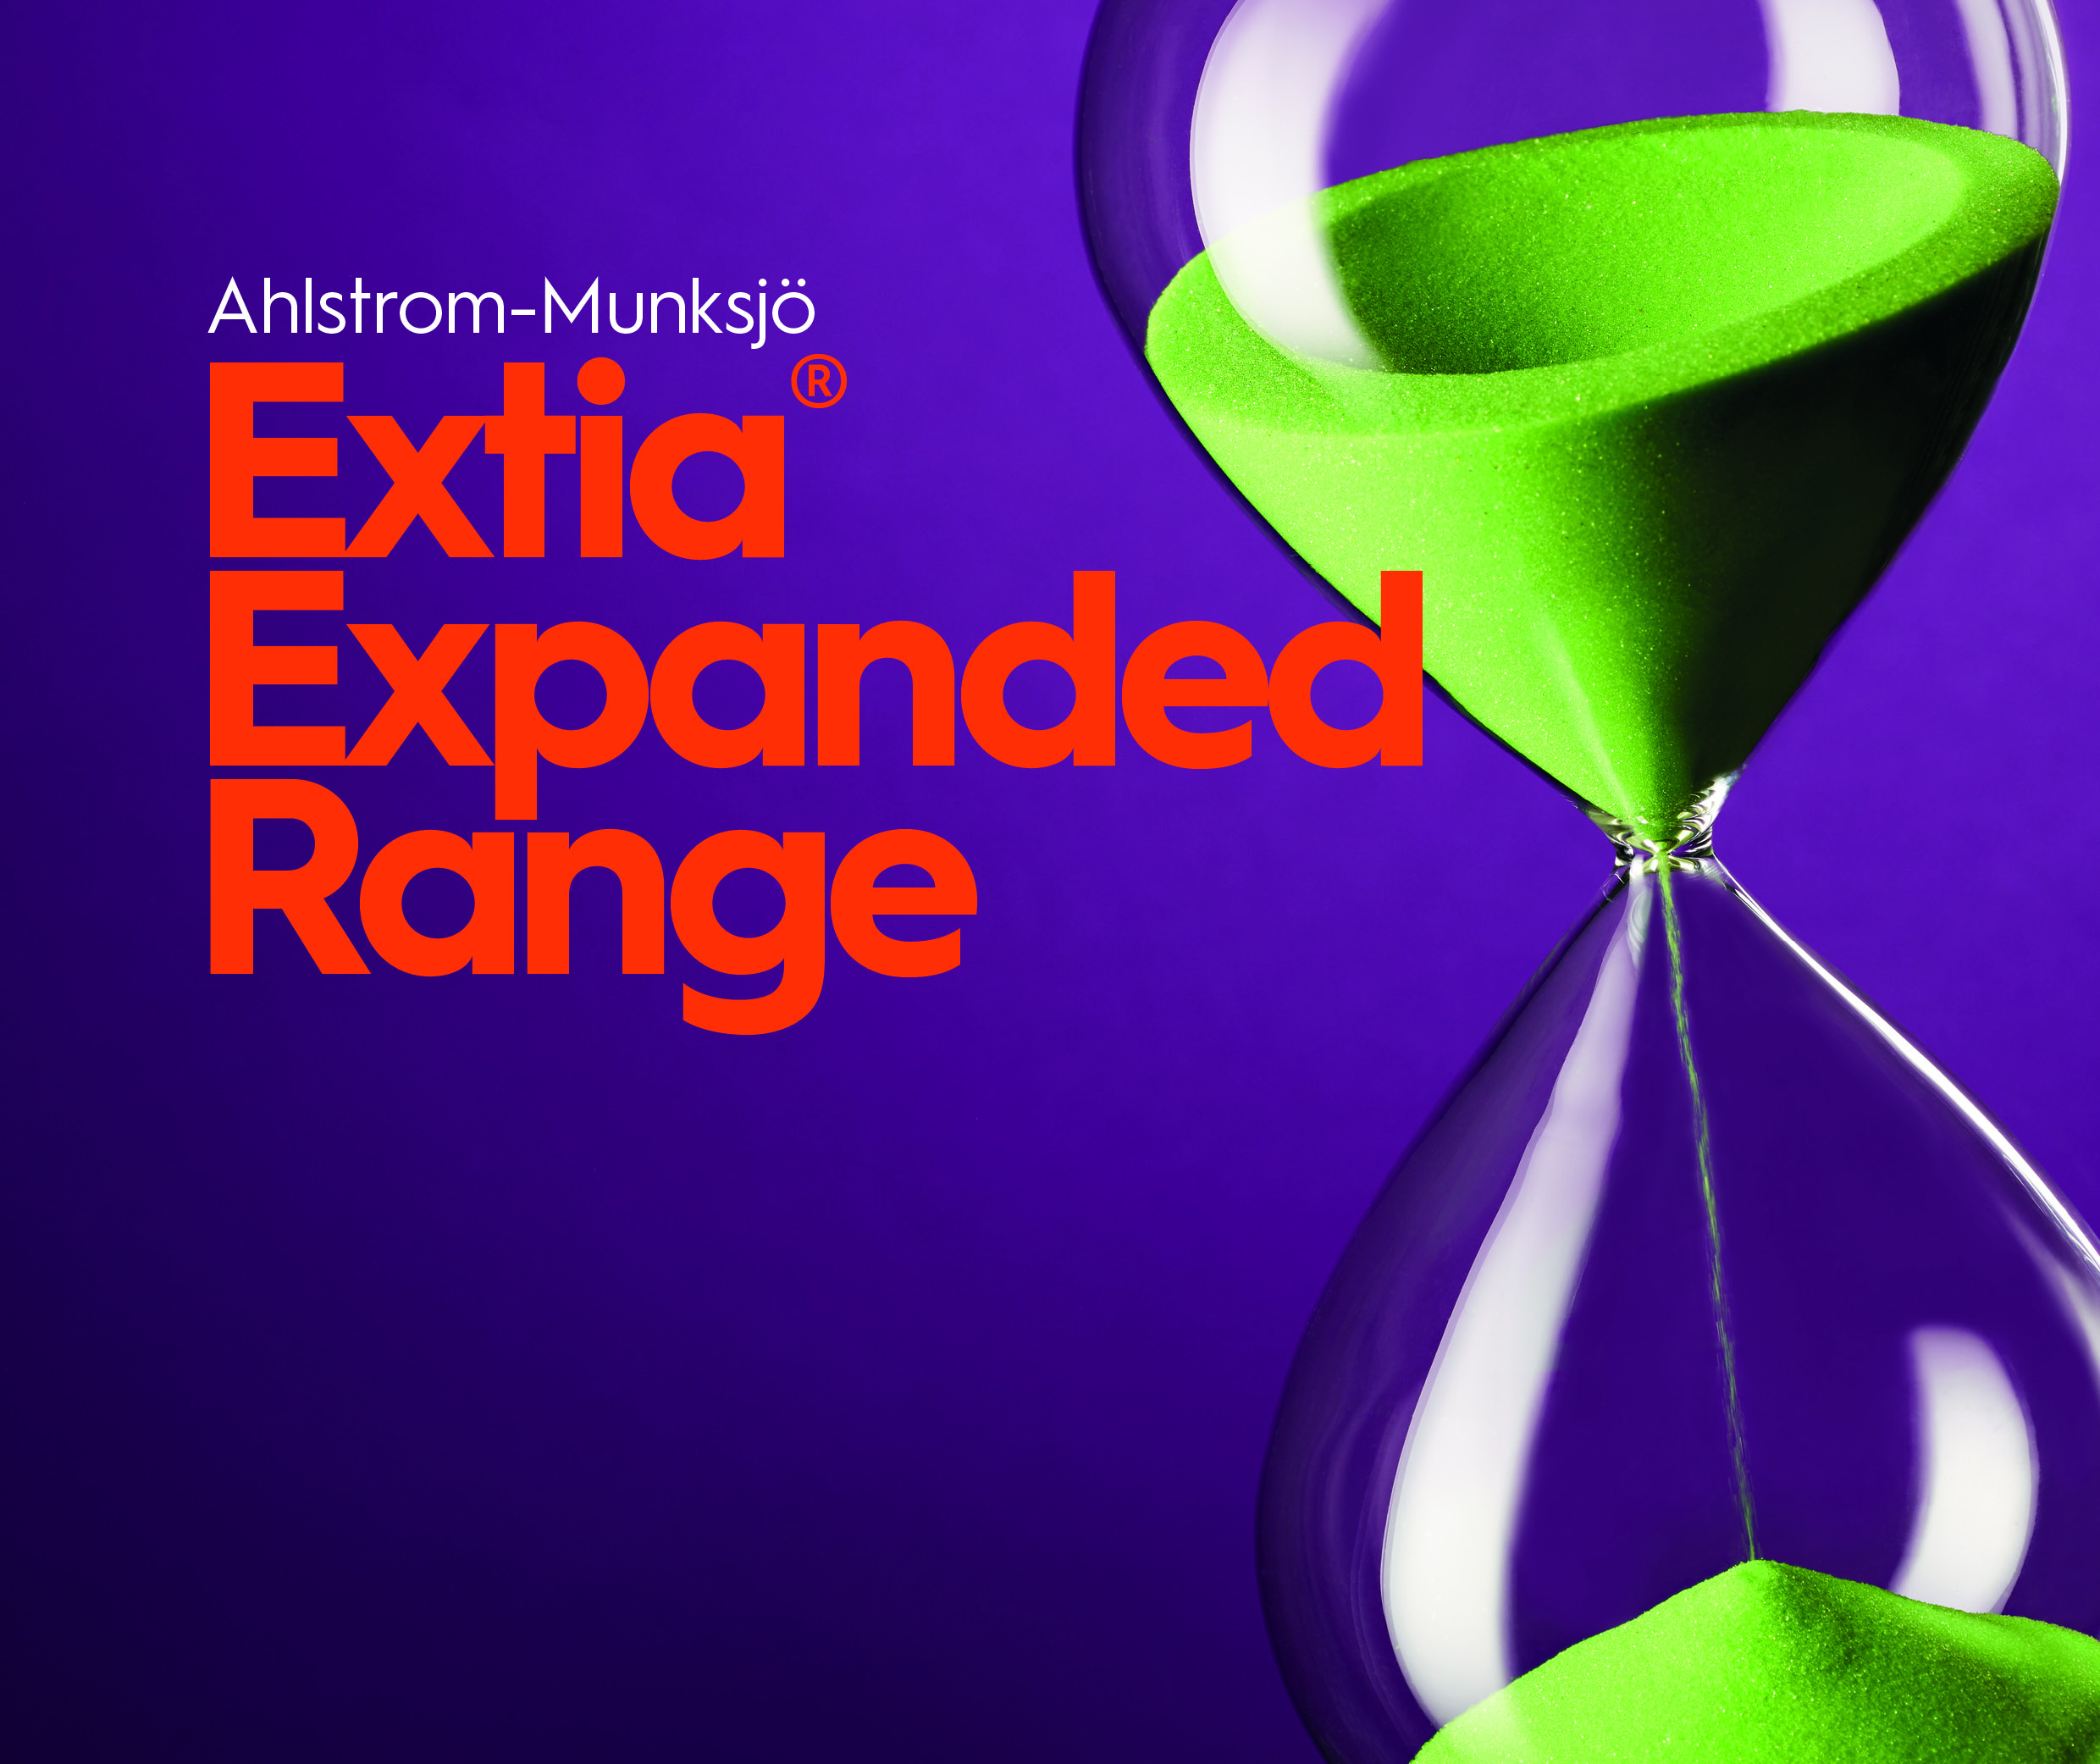 Ahlstrom-Munksjö’ s expanded Extia range is designed for industrial air filtration applications.